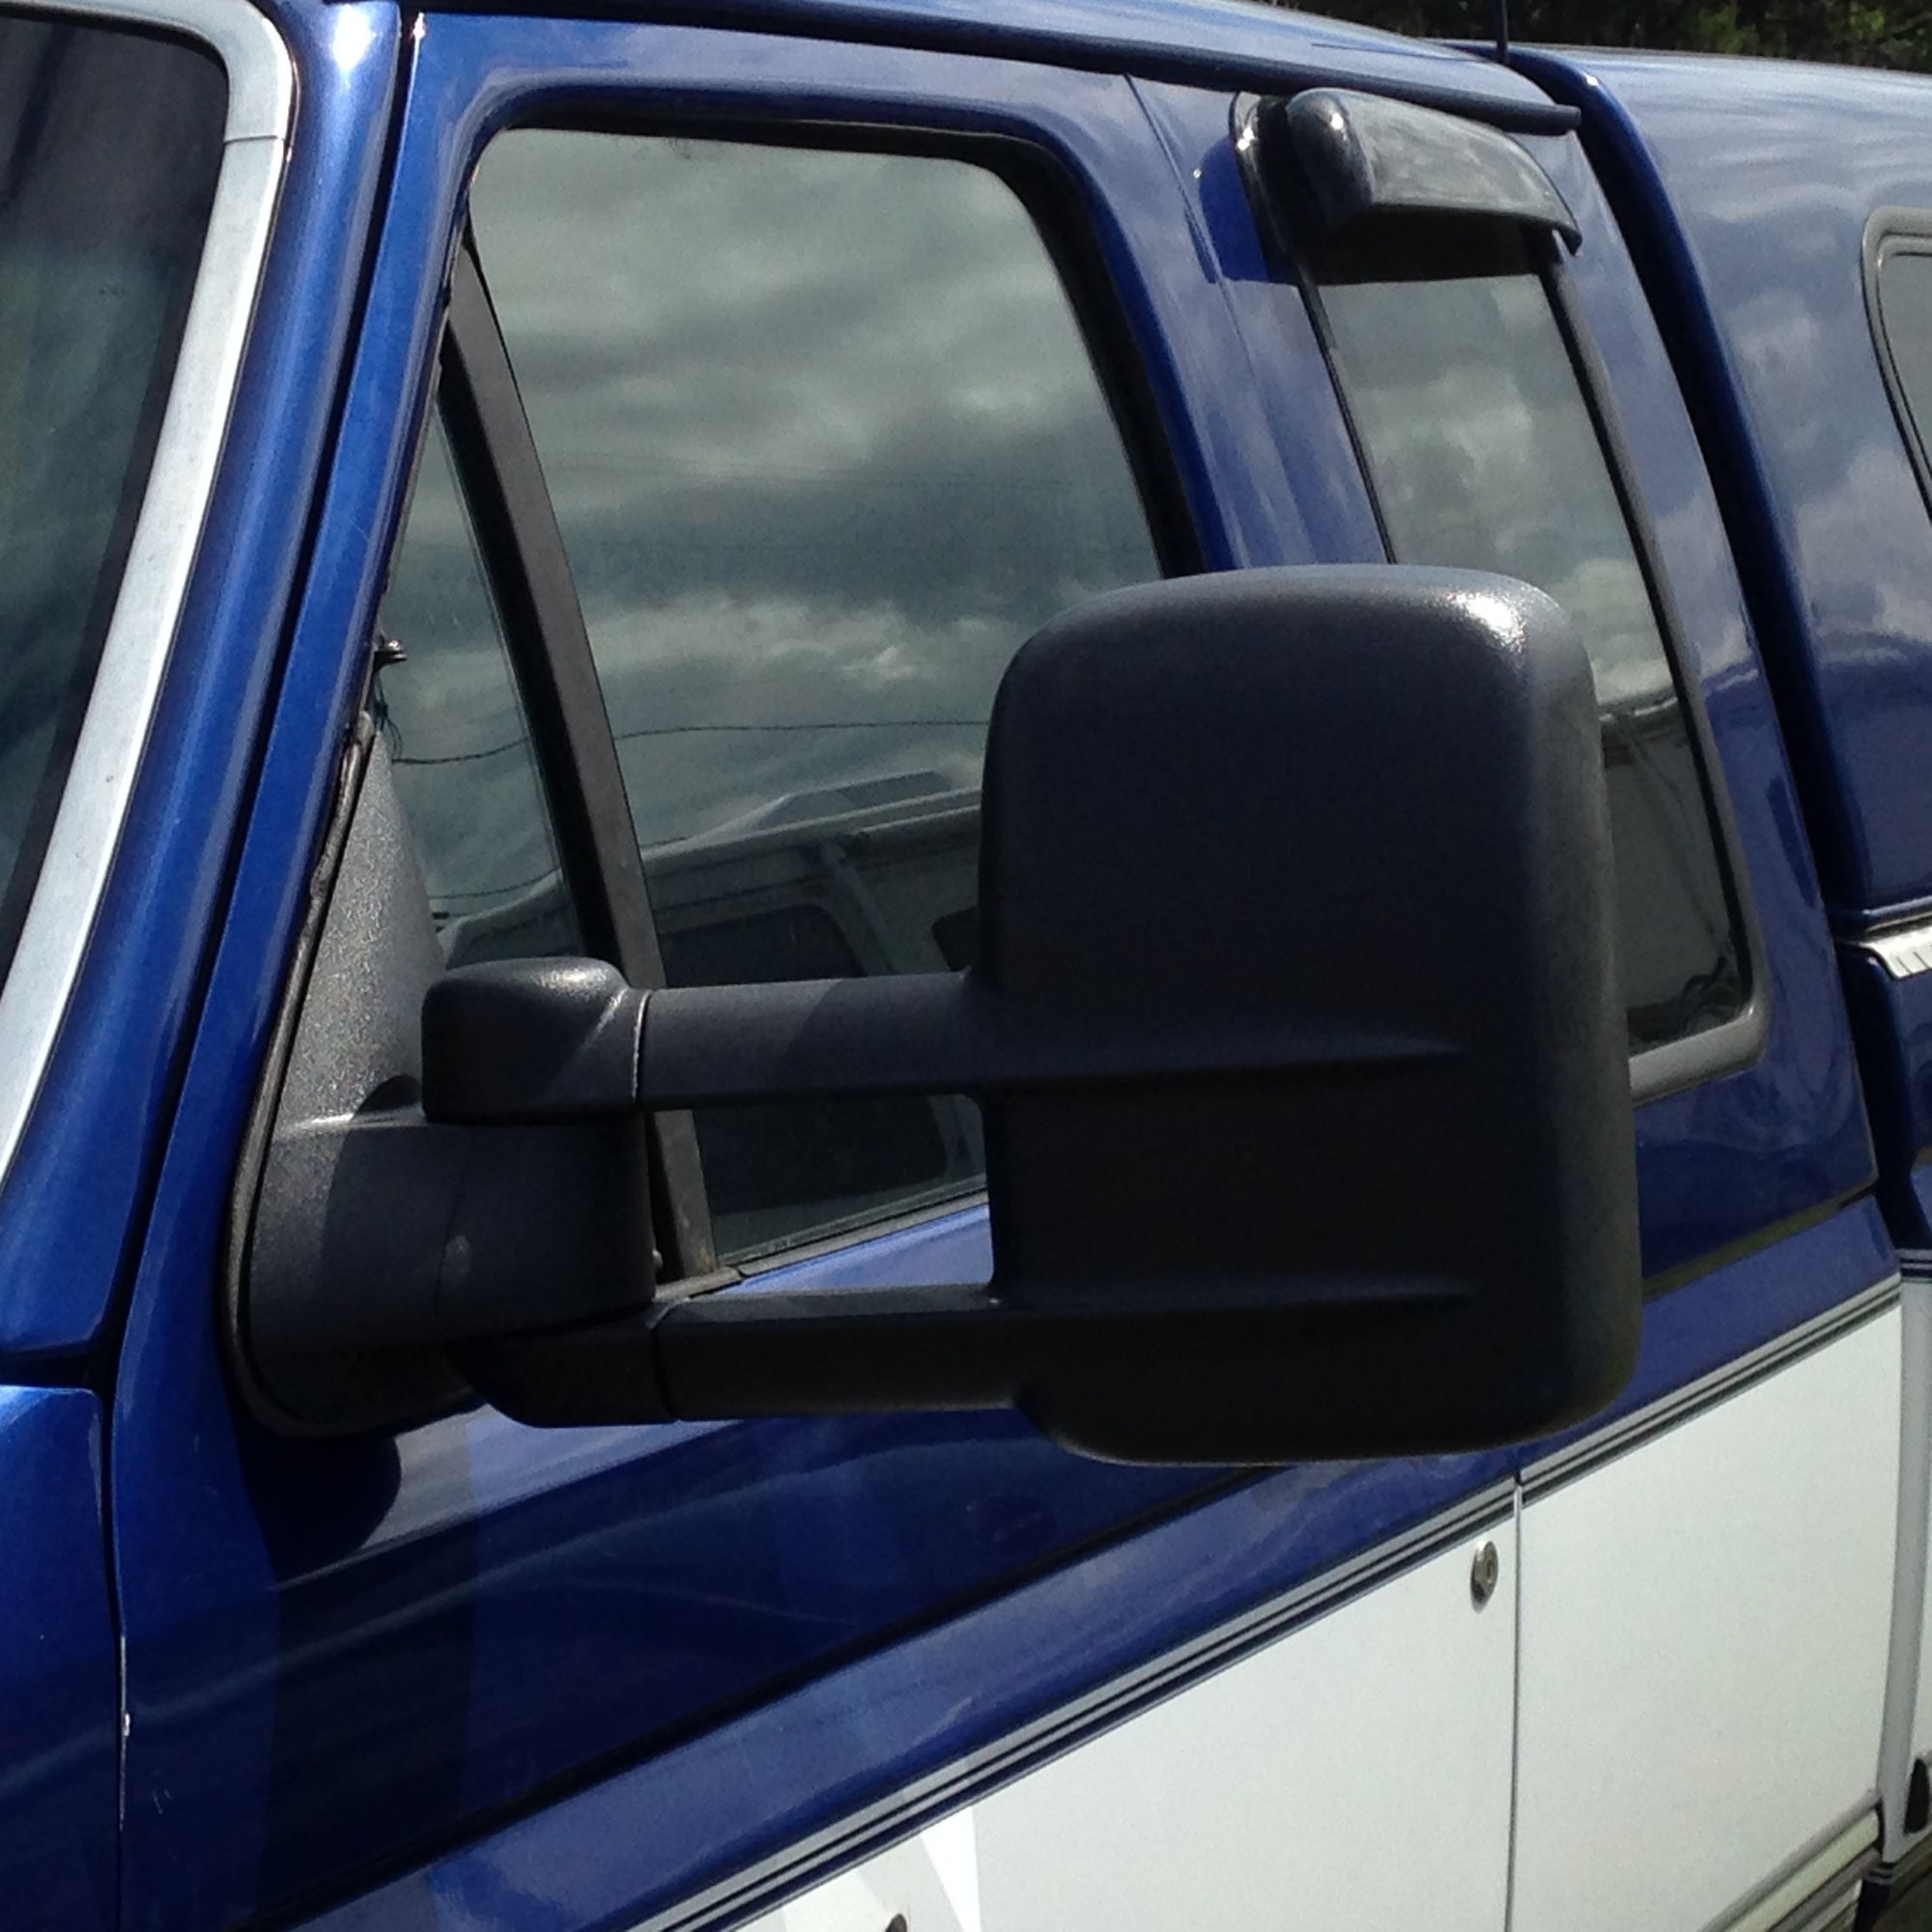 Super Duty Mirrors on Older Model Fords.